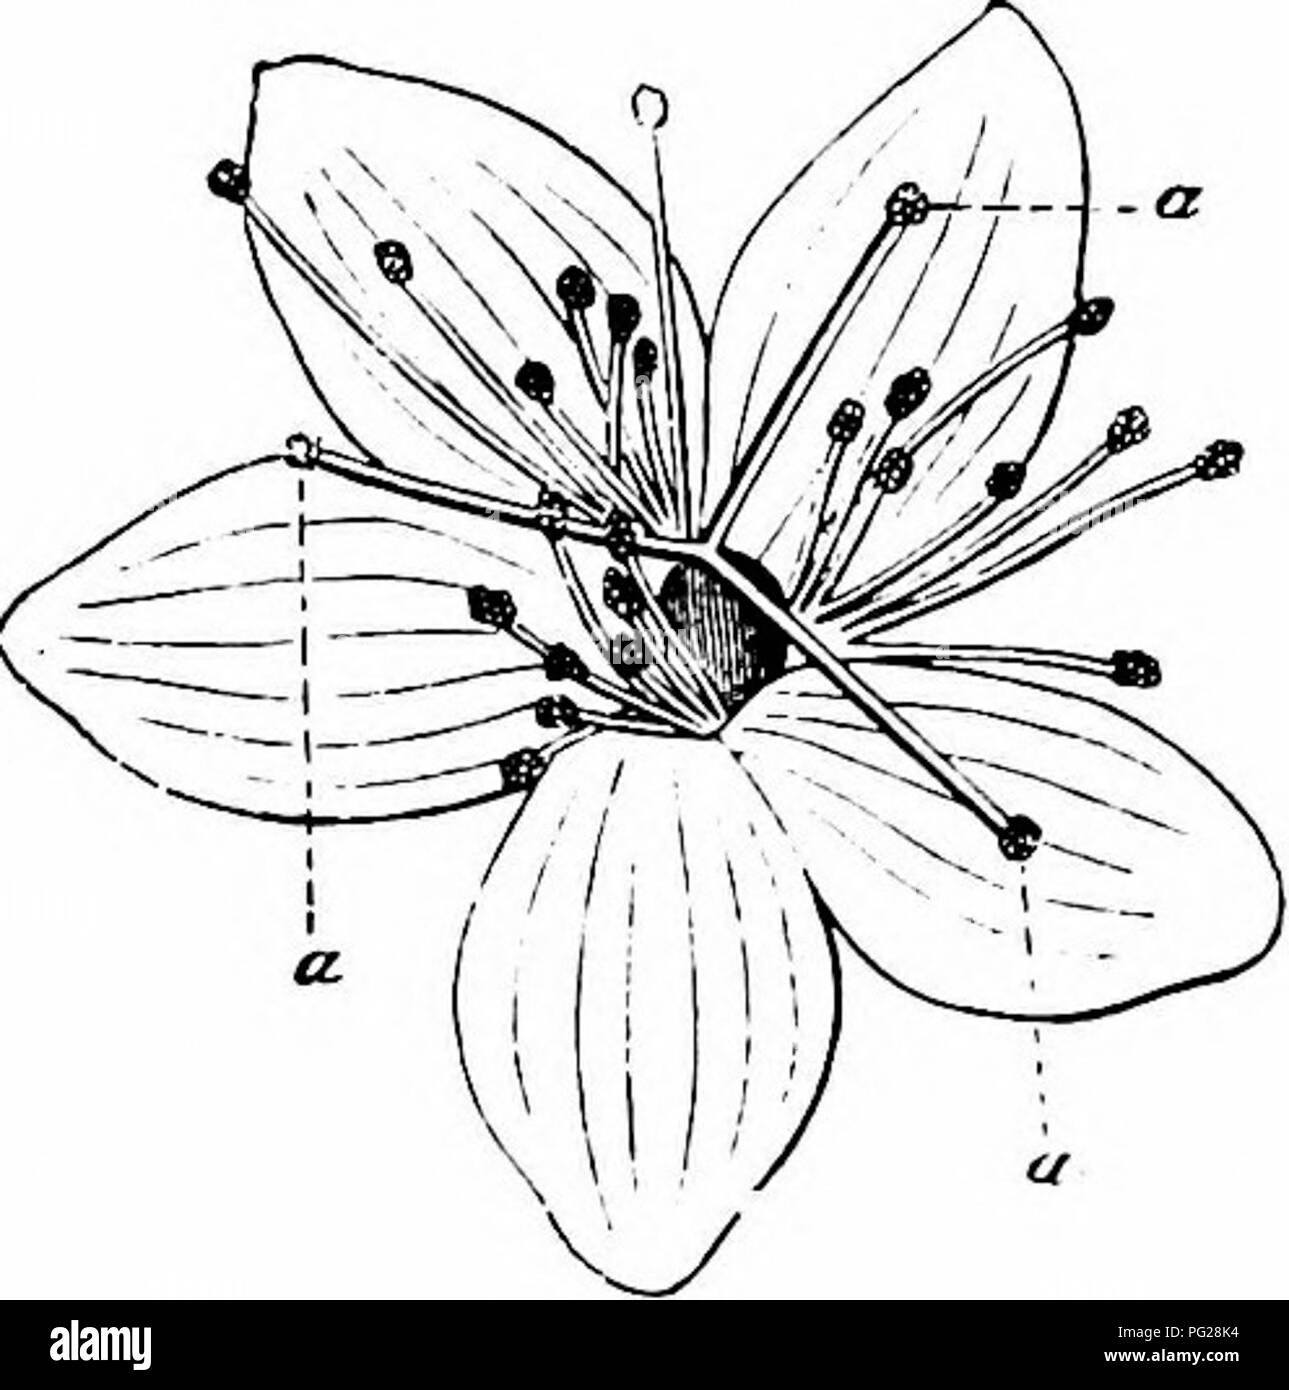 . Handbook of flower pollination : based upon Hermann Mu?ller's work 'The fertilisation of flowers by insects' . Fertilization of plants. ELA TINEAE—HYPERICINEAE 203 XVIII. ORDER ELATINEAE CAMB. There is only one plant included in this order, of which the flowers have been studied as regards pollination. 145. Elatine L. 507. Elatine hexandra DC.—Vaucher says that automatic self-pollination takes place in the small reddish-white flowers of this species, the anthers dehiscing introrsely, and shedding pollen directly upon the three stigmas. XIX. ORDER HYPERICINEAE DC. This order is represented by Stock Photo